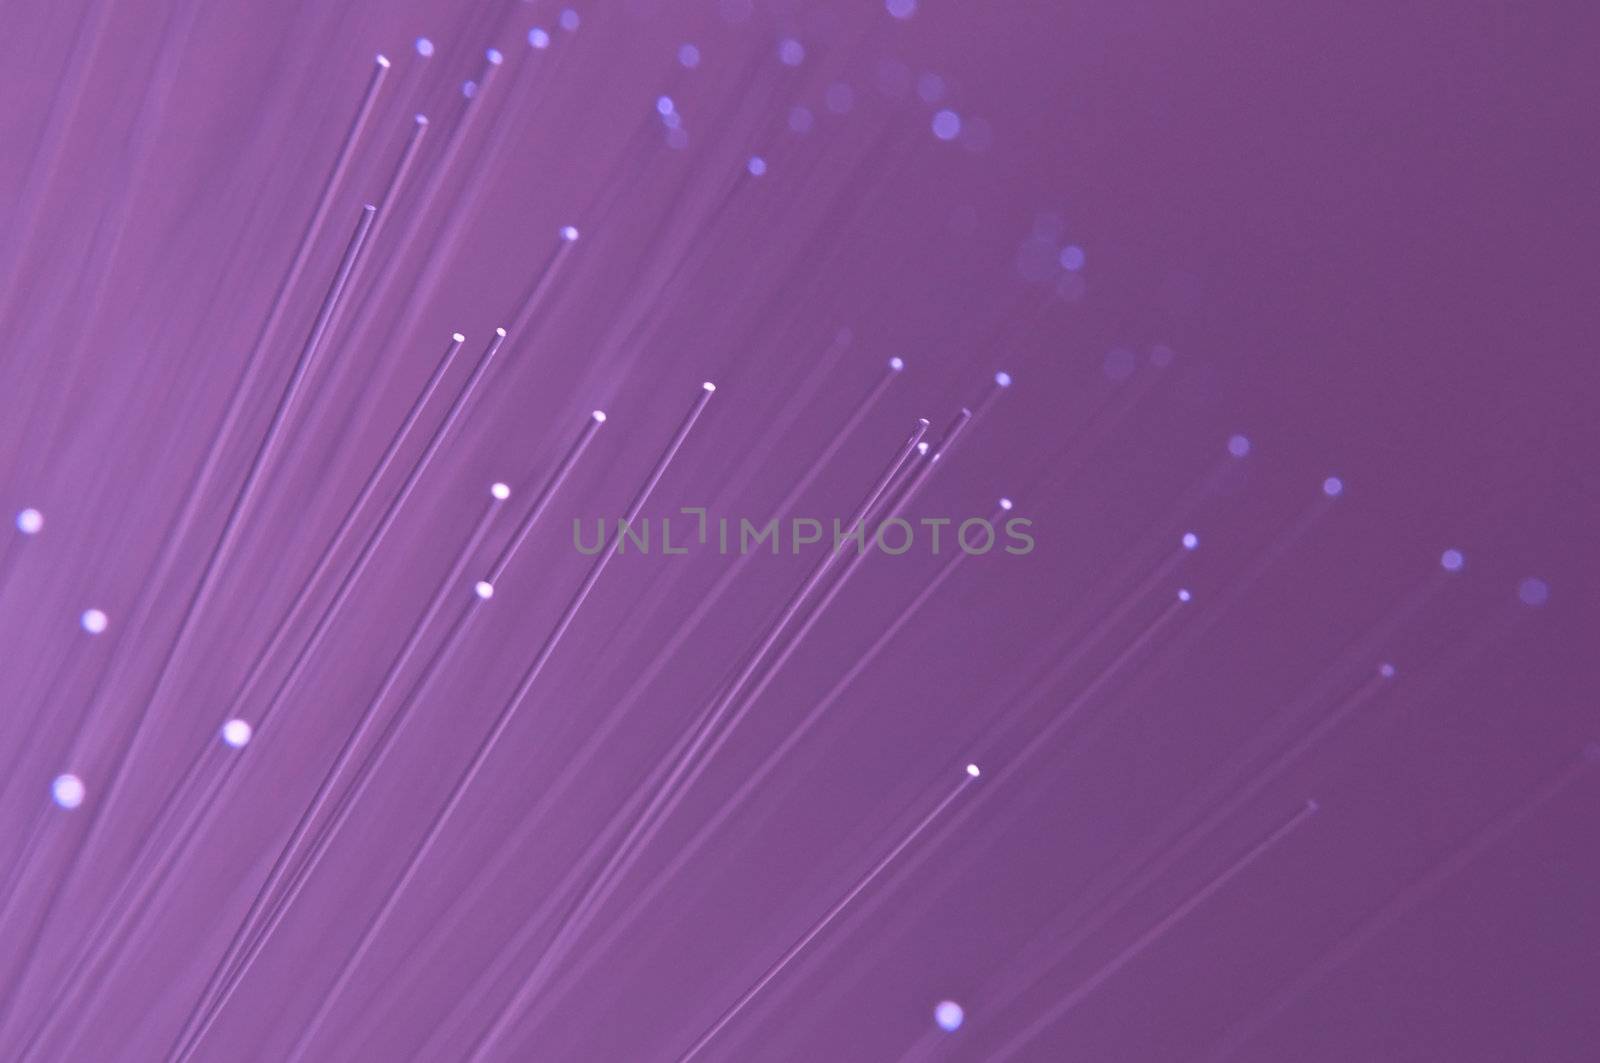 Close and low level capturing the ends of many illuminated mauve fibre optic strands.